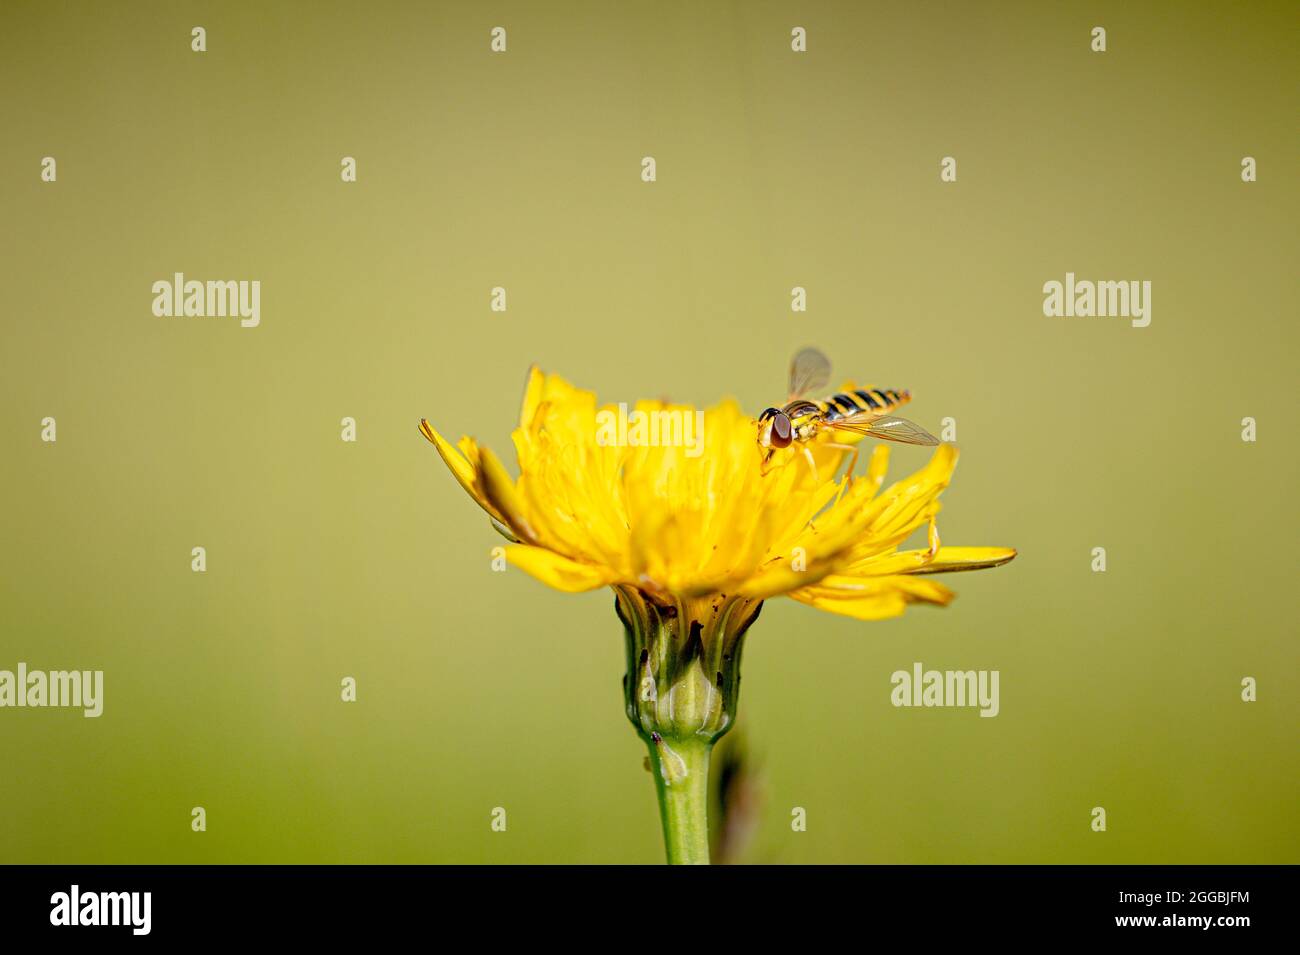 Hover fly collecting pollen from a dandelion flower Stock Photo